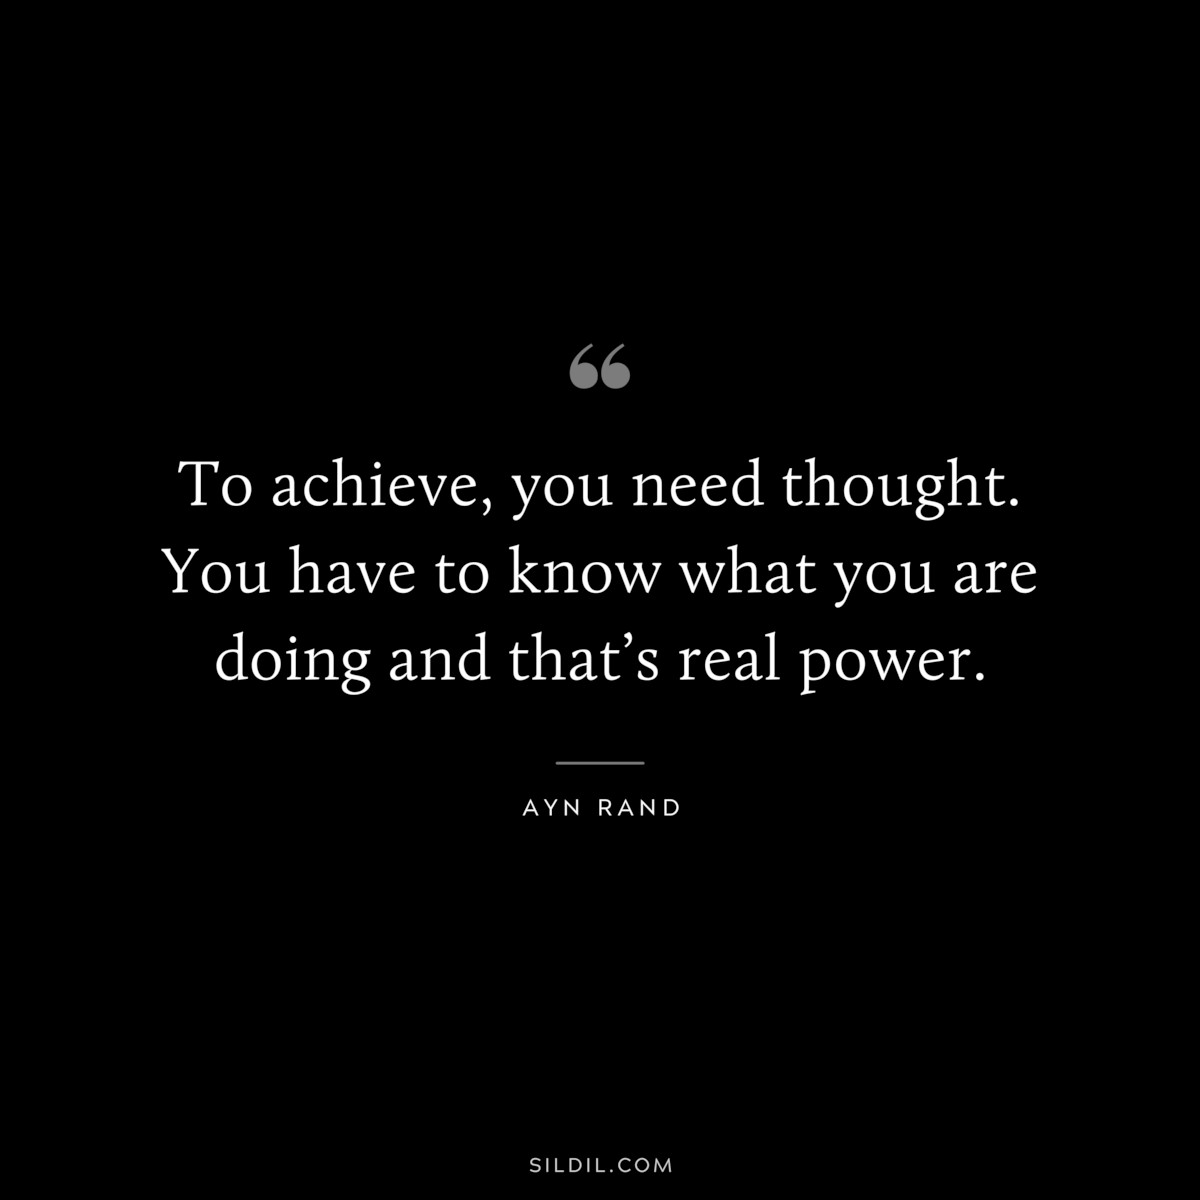 To achieve, you need thought. You have to know what you are doing and that’s real power. ― Ayn Rand